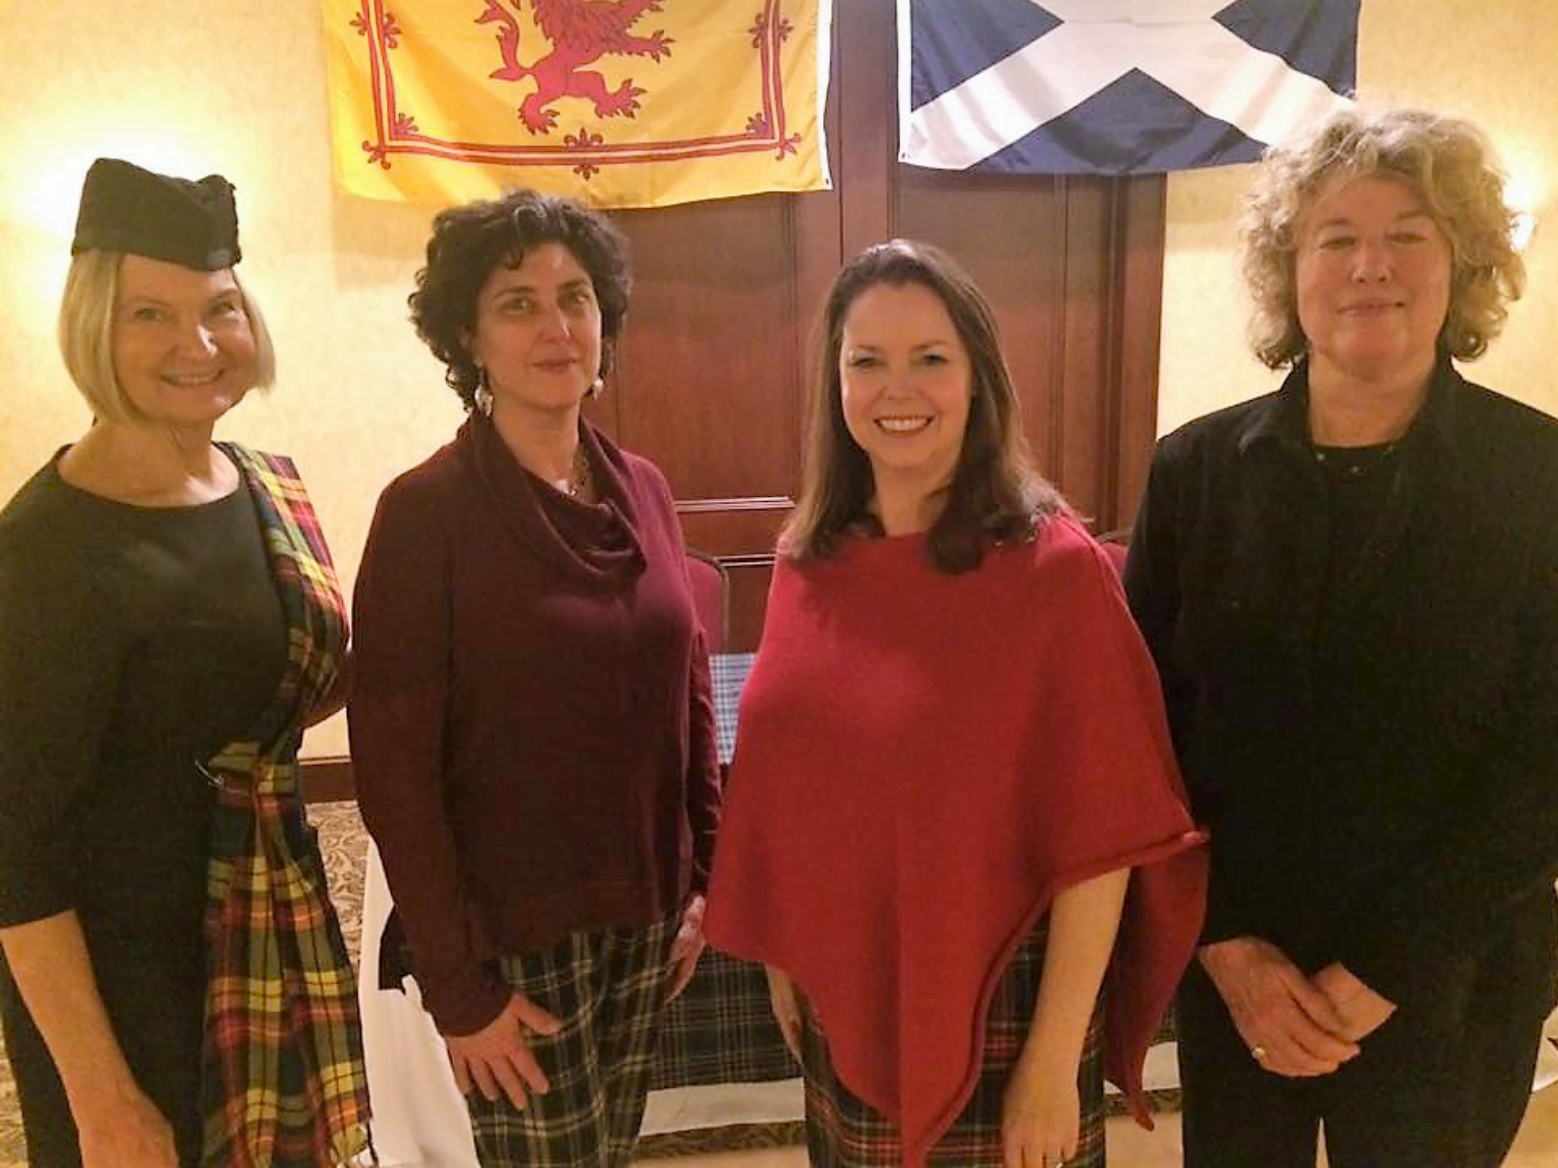 Greenwich Pen Women, from left: Deborah Weir, President; Kia Heavey, Letters member; Stasha Healy, Letters Chair and Burns Supper organizer; Leigh Grant, Letters member